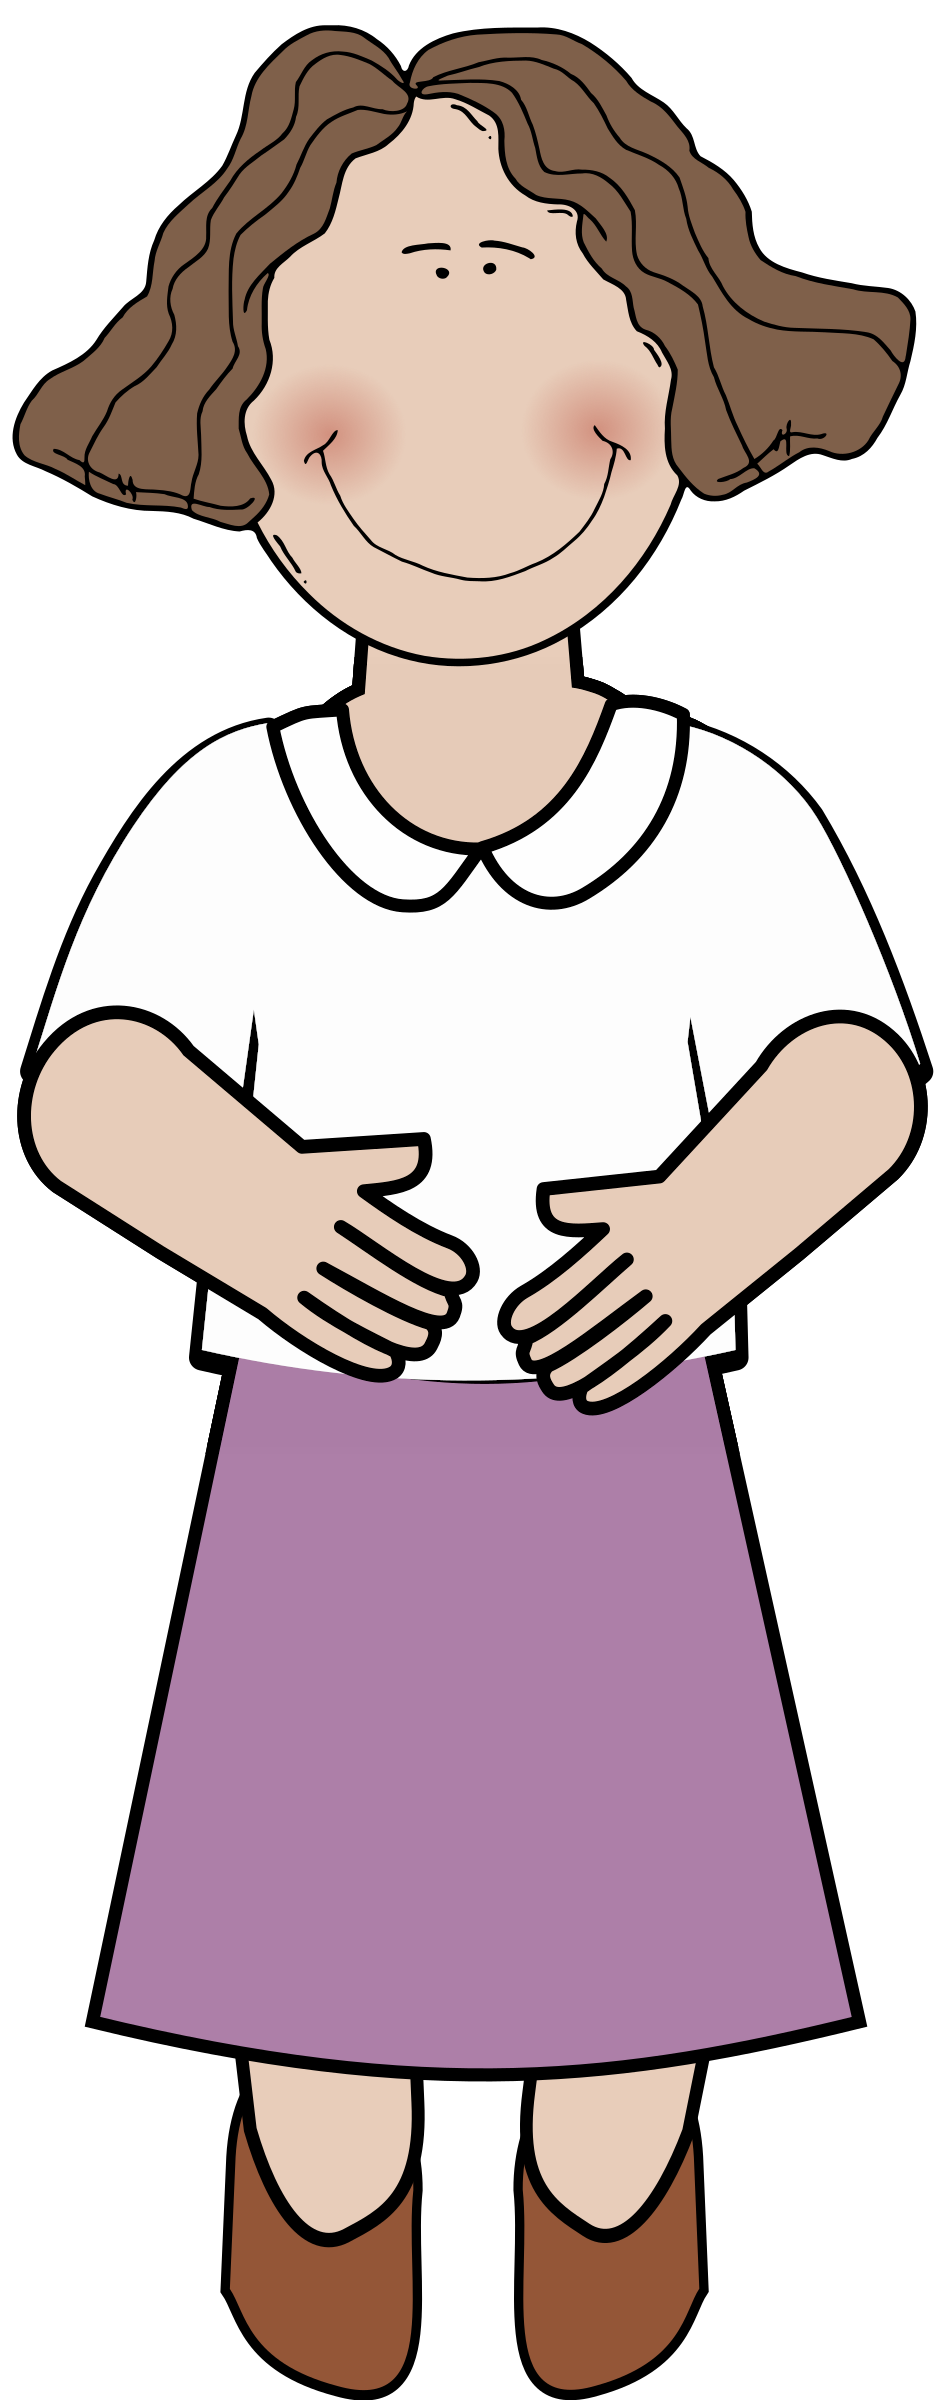 Adult clipart. Mommy group 